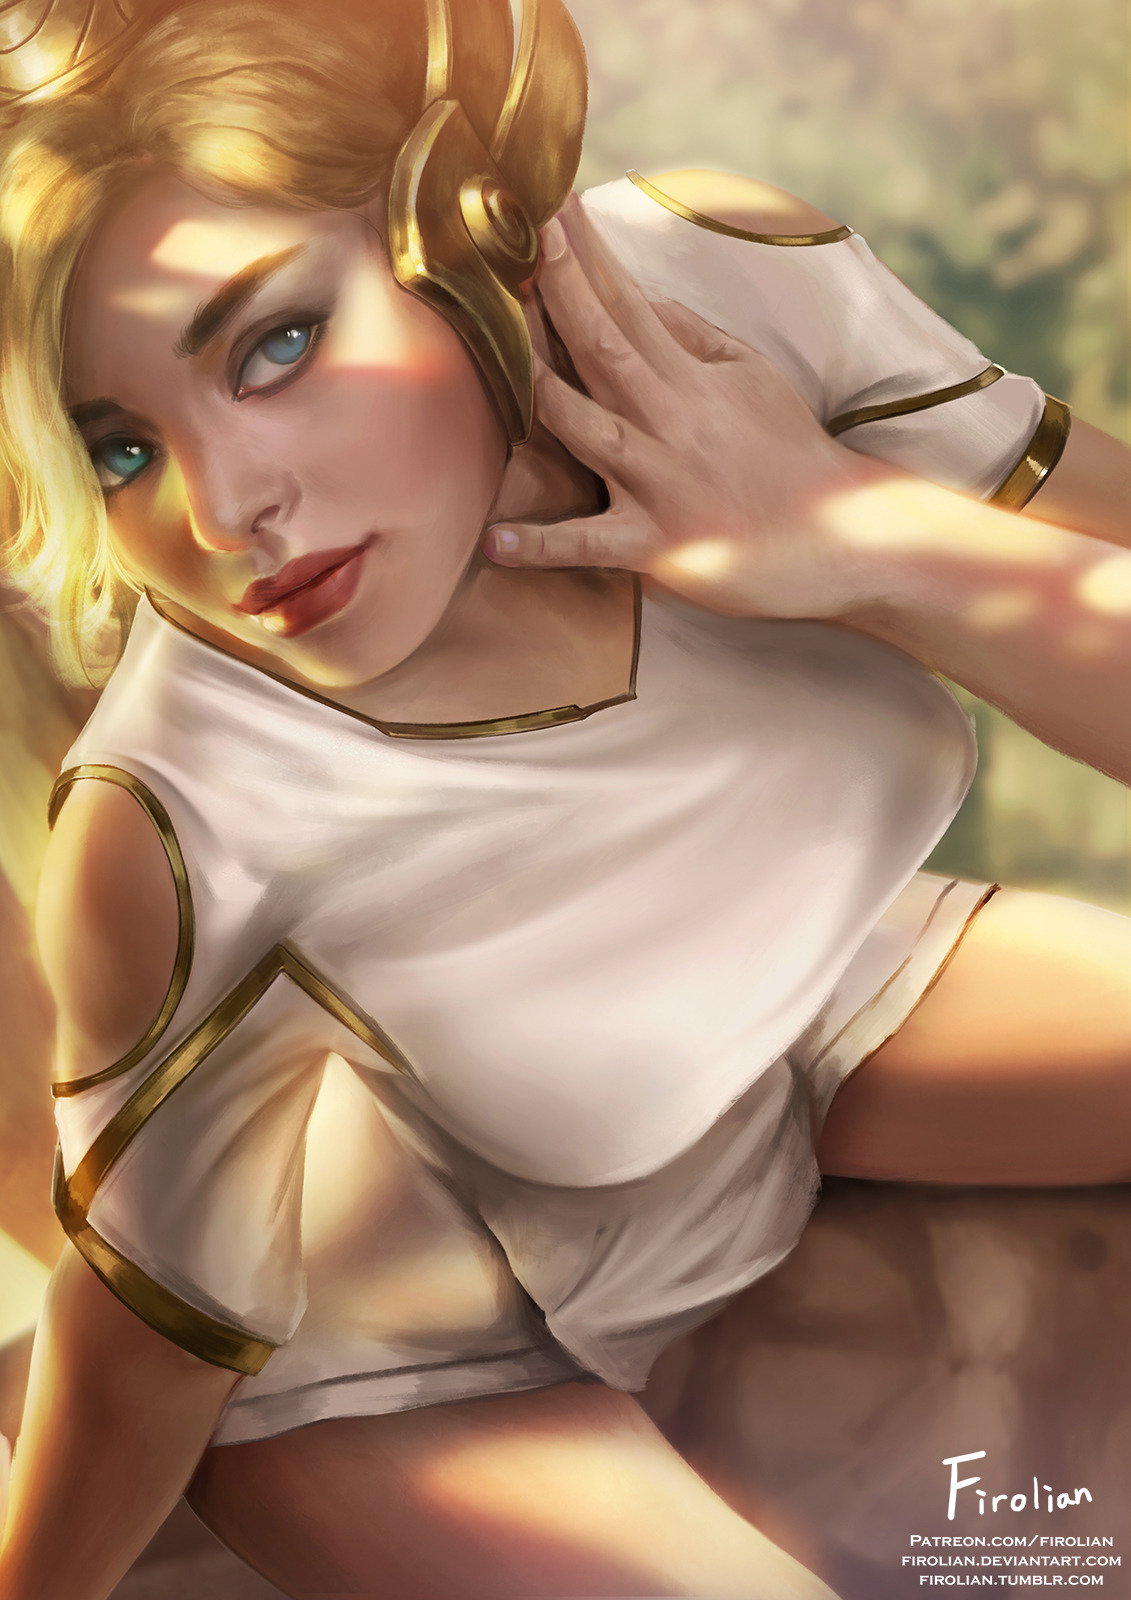 firolian: Winged Victory Mercy First few pages (NSFW!) : https://imgur.com/a/gLq4B